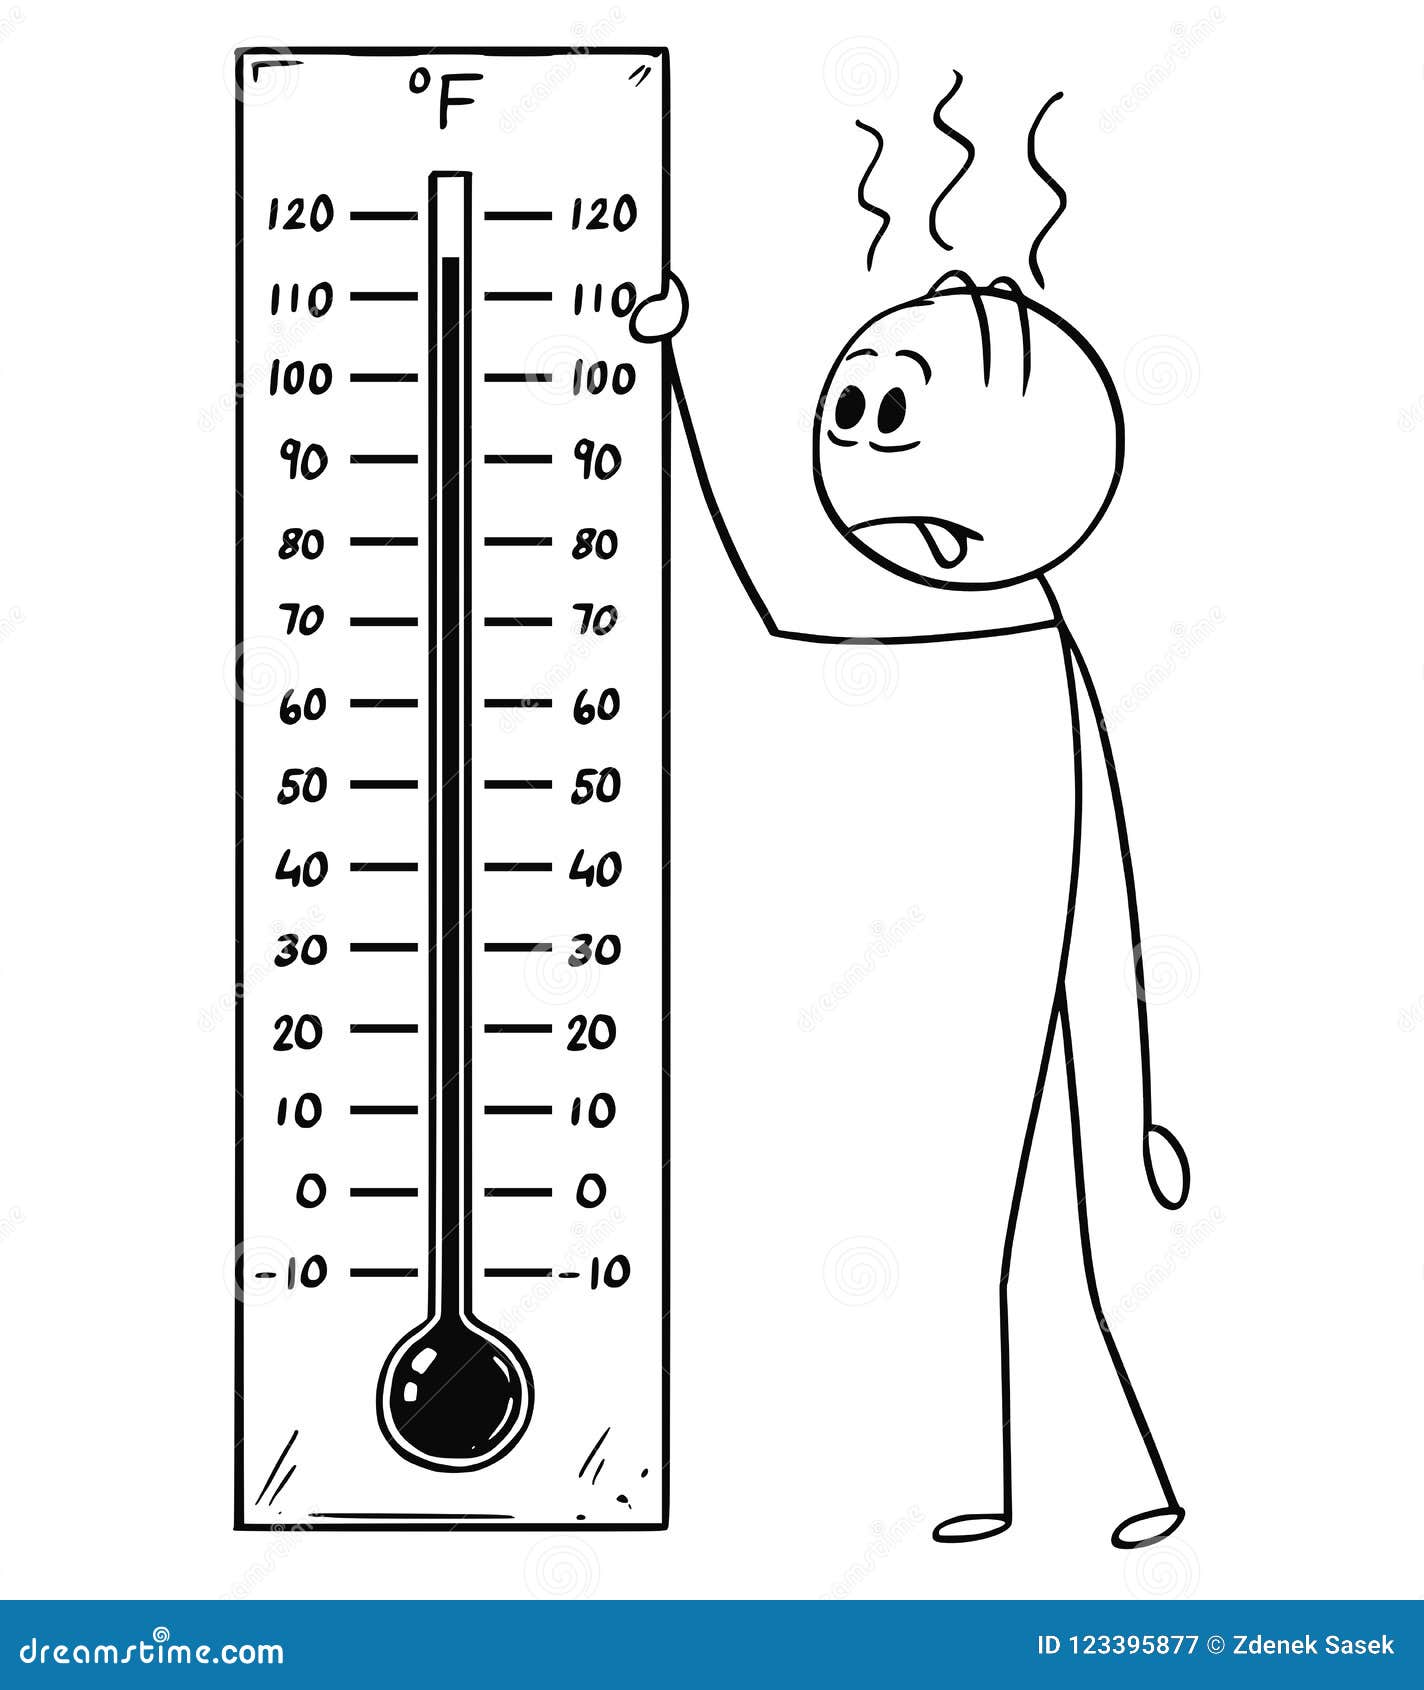 Cartoon of Man Holding Fahrenheit Thermometer Showing Hot Weather or